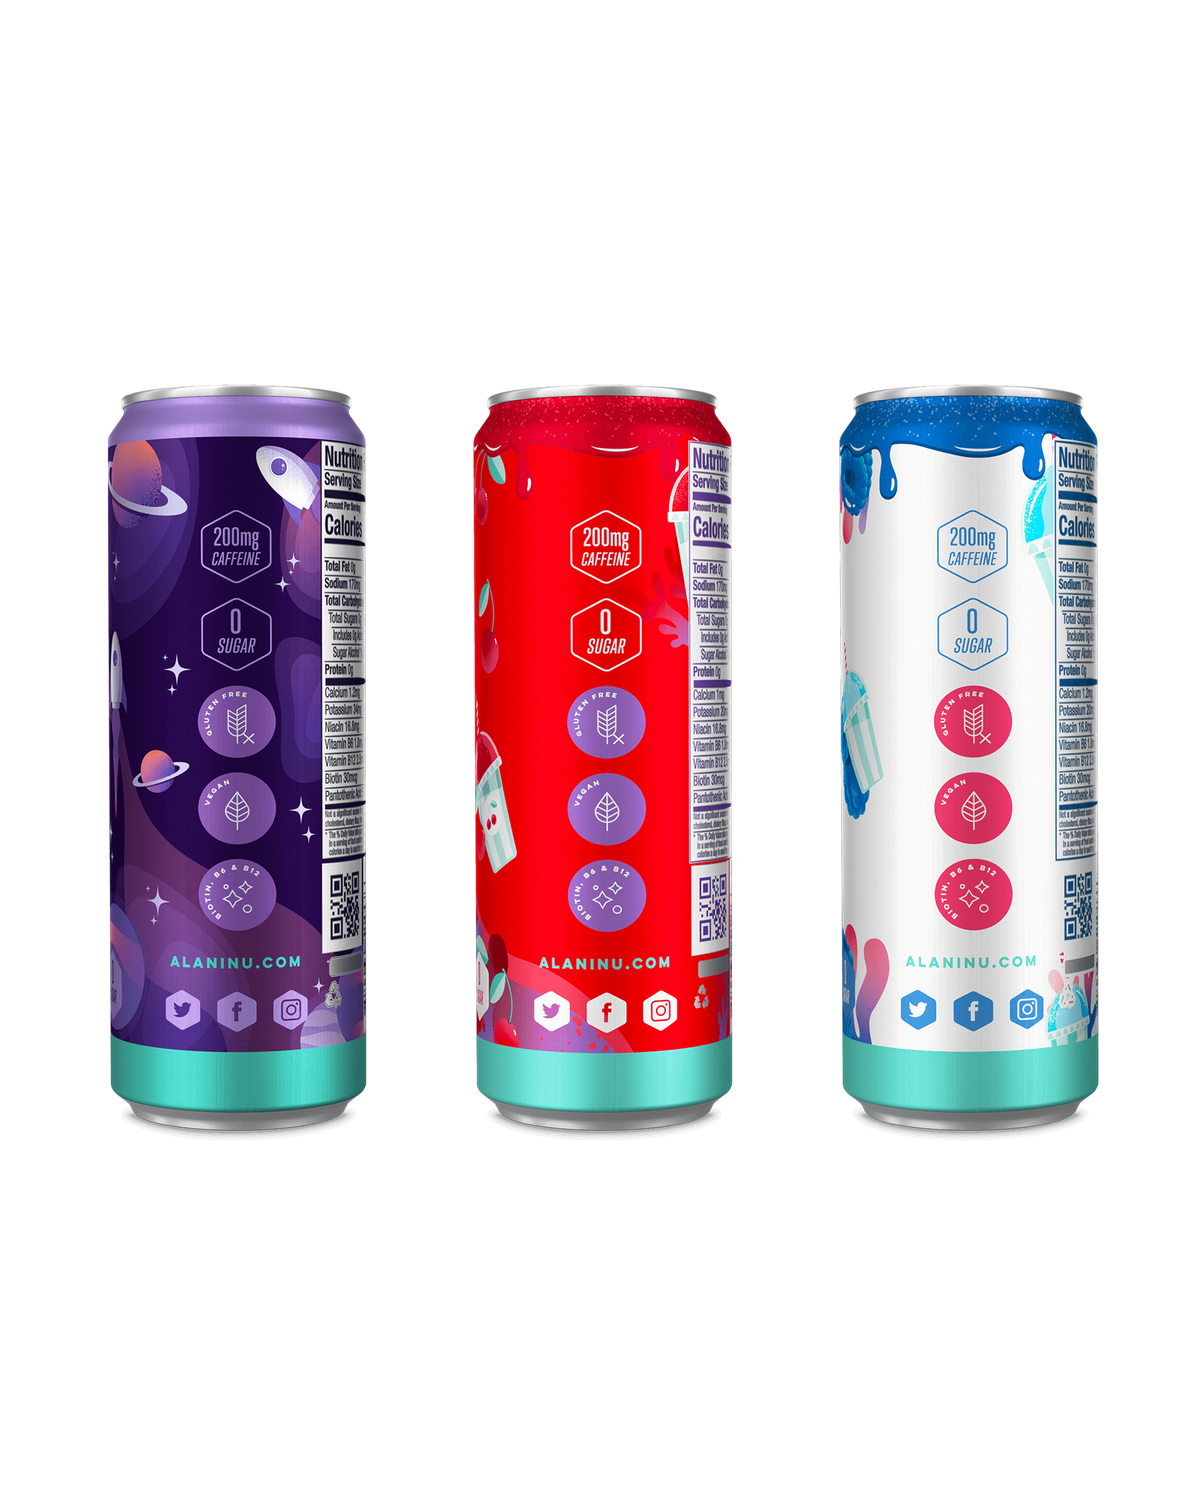 A side view of Energy Drinks in Electric energy flavors showcasing caffeine details.